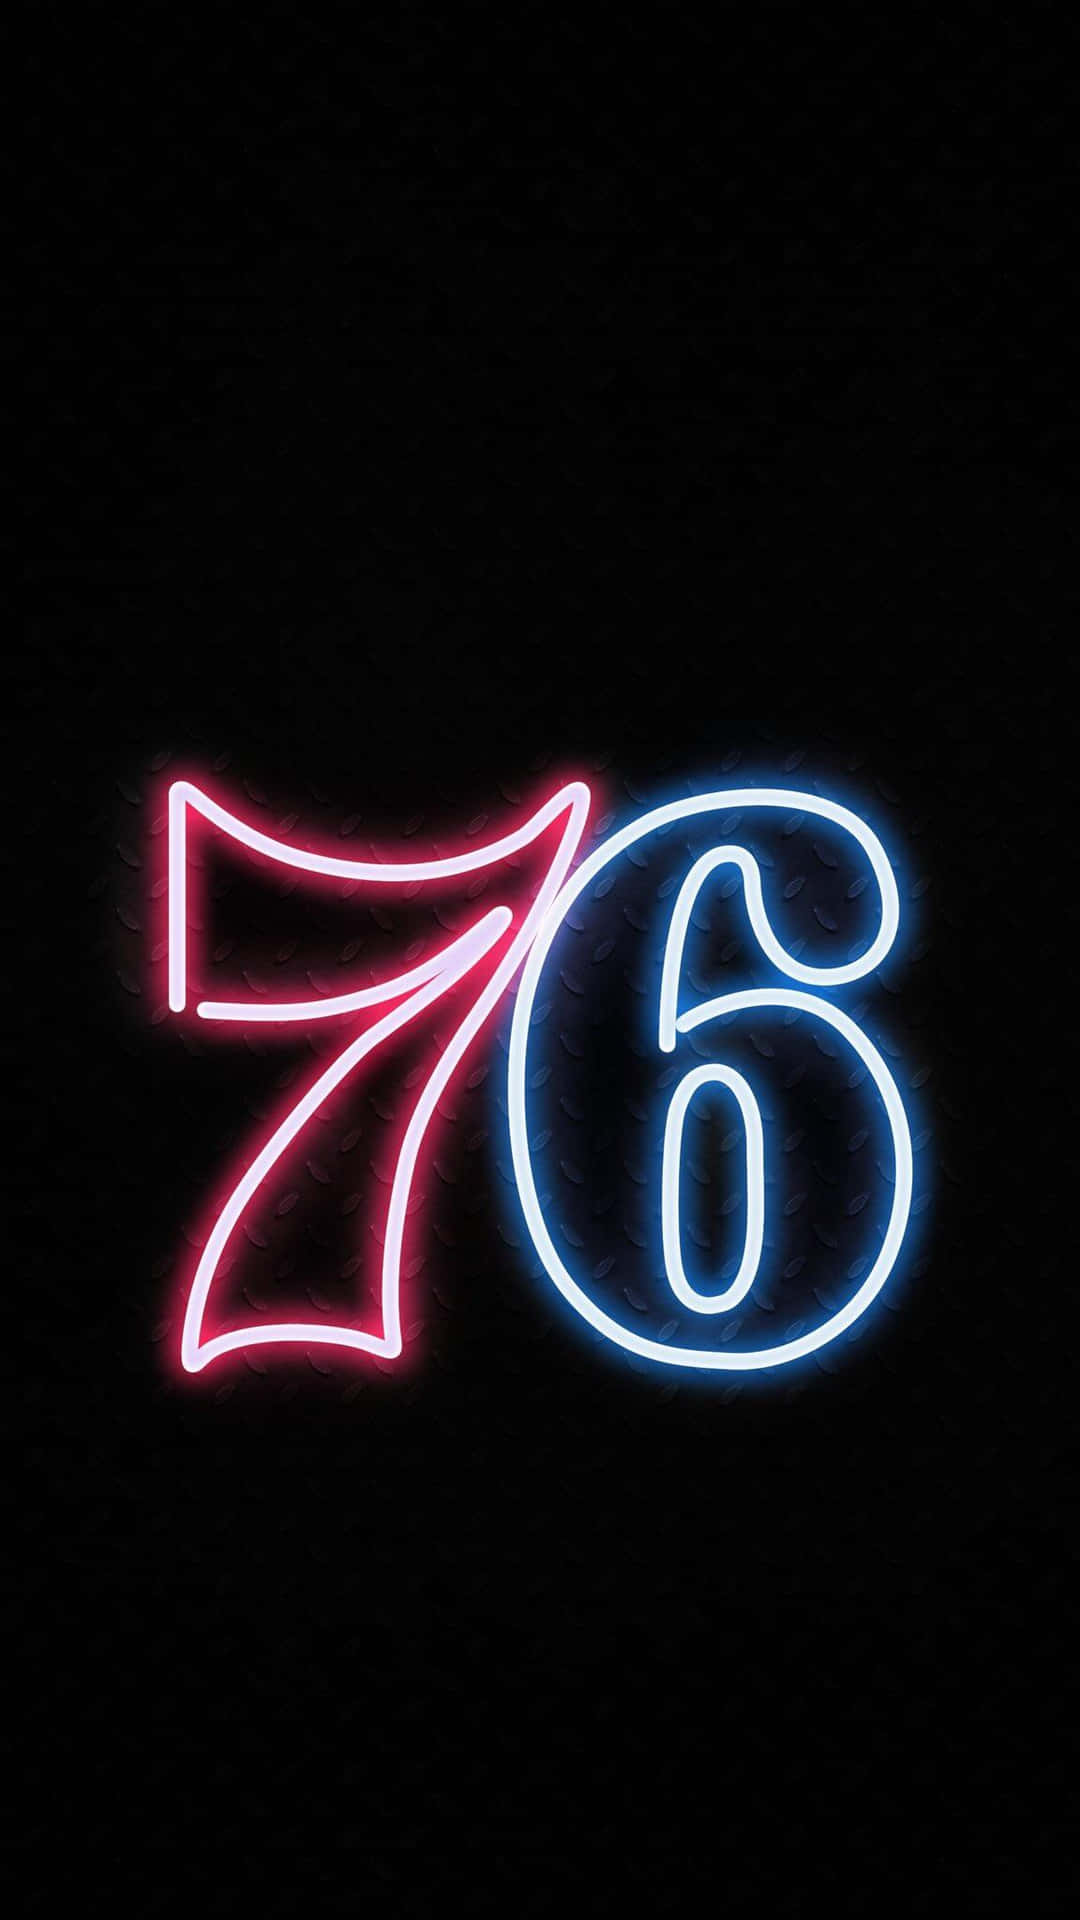 Get the Official Philadelphia 76ers Iphone Wallpaper to Show Your Support Wallpaper